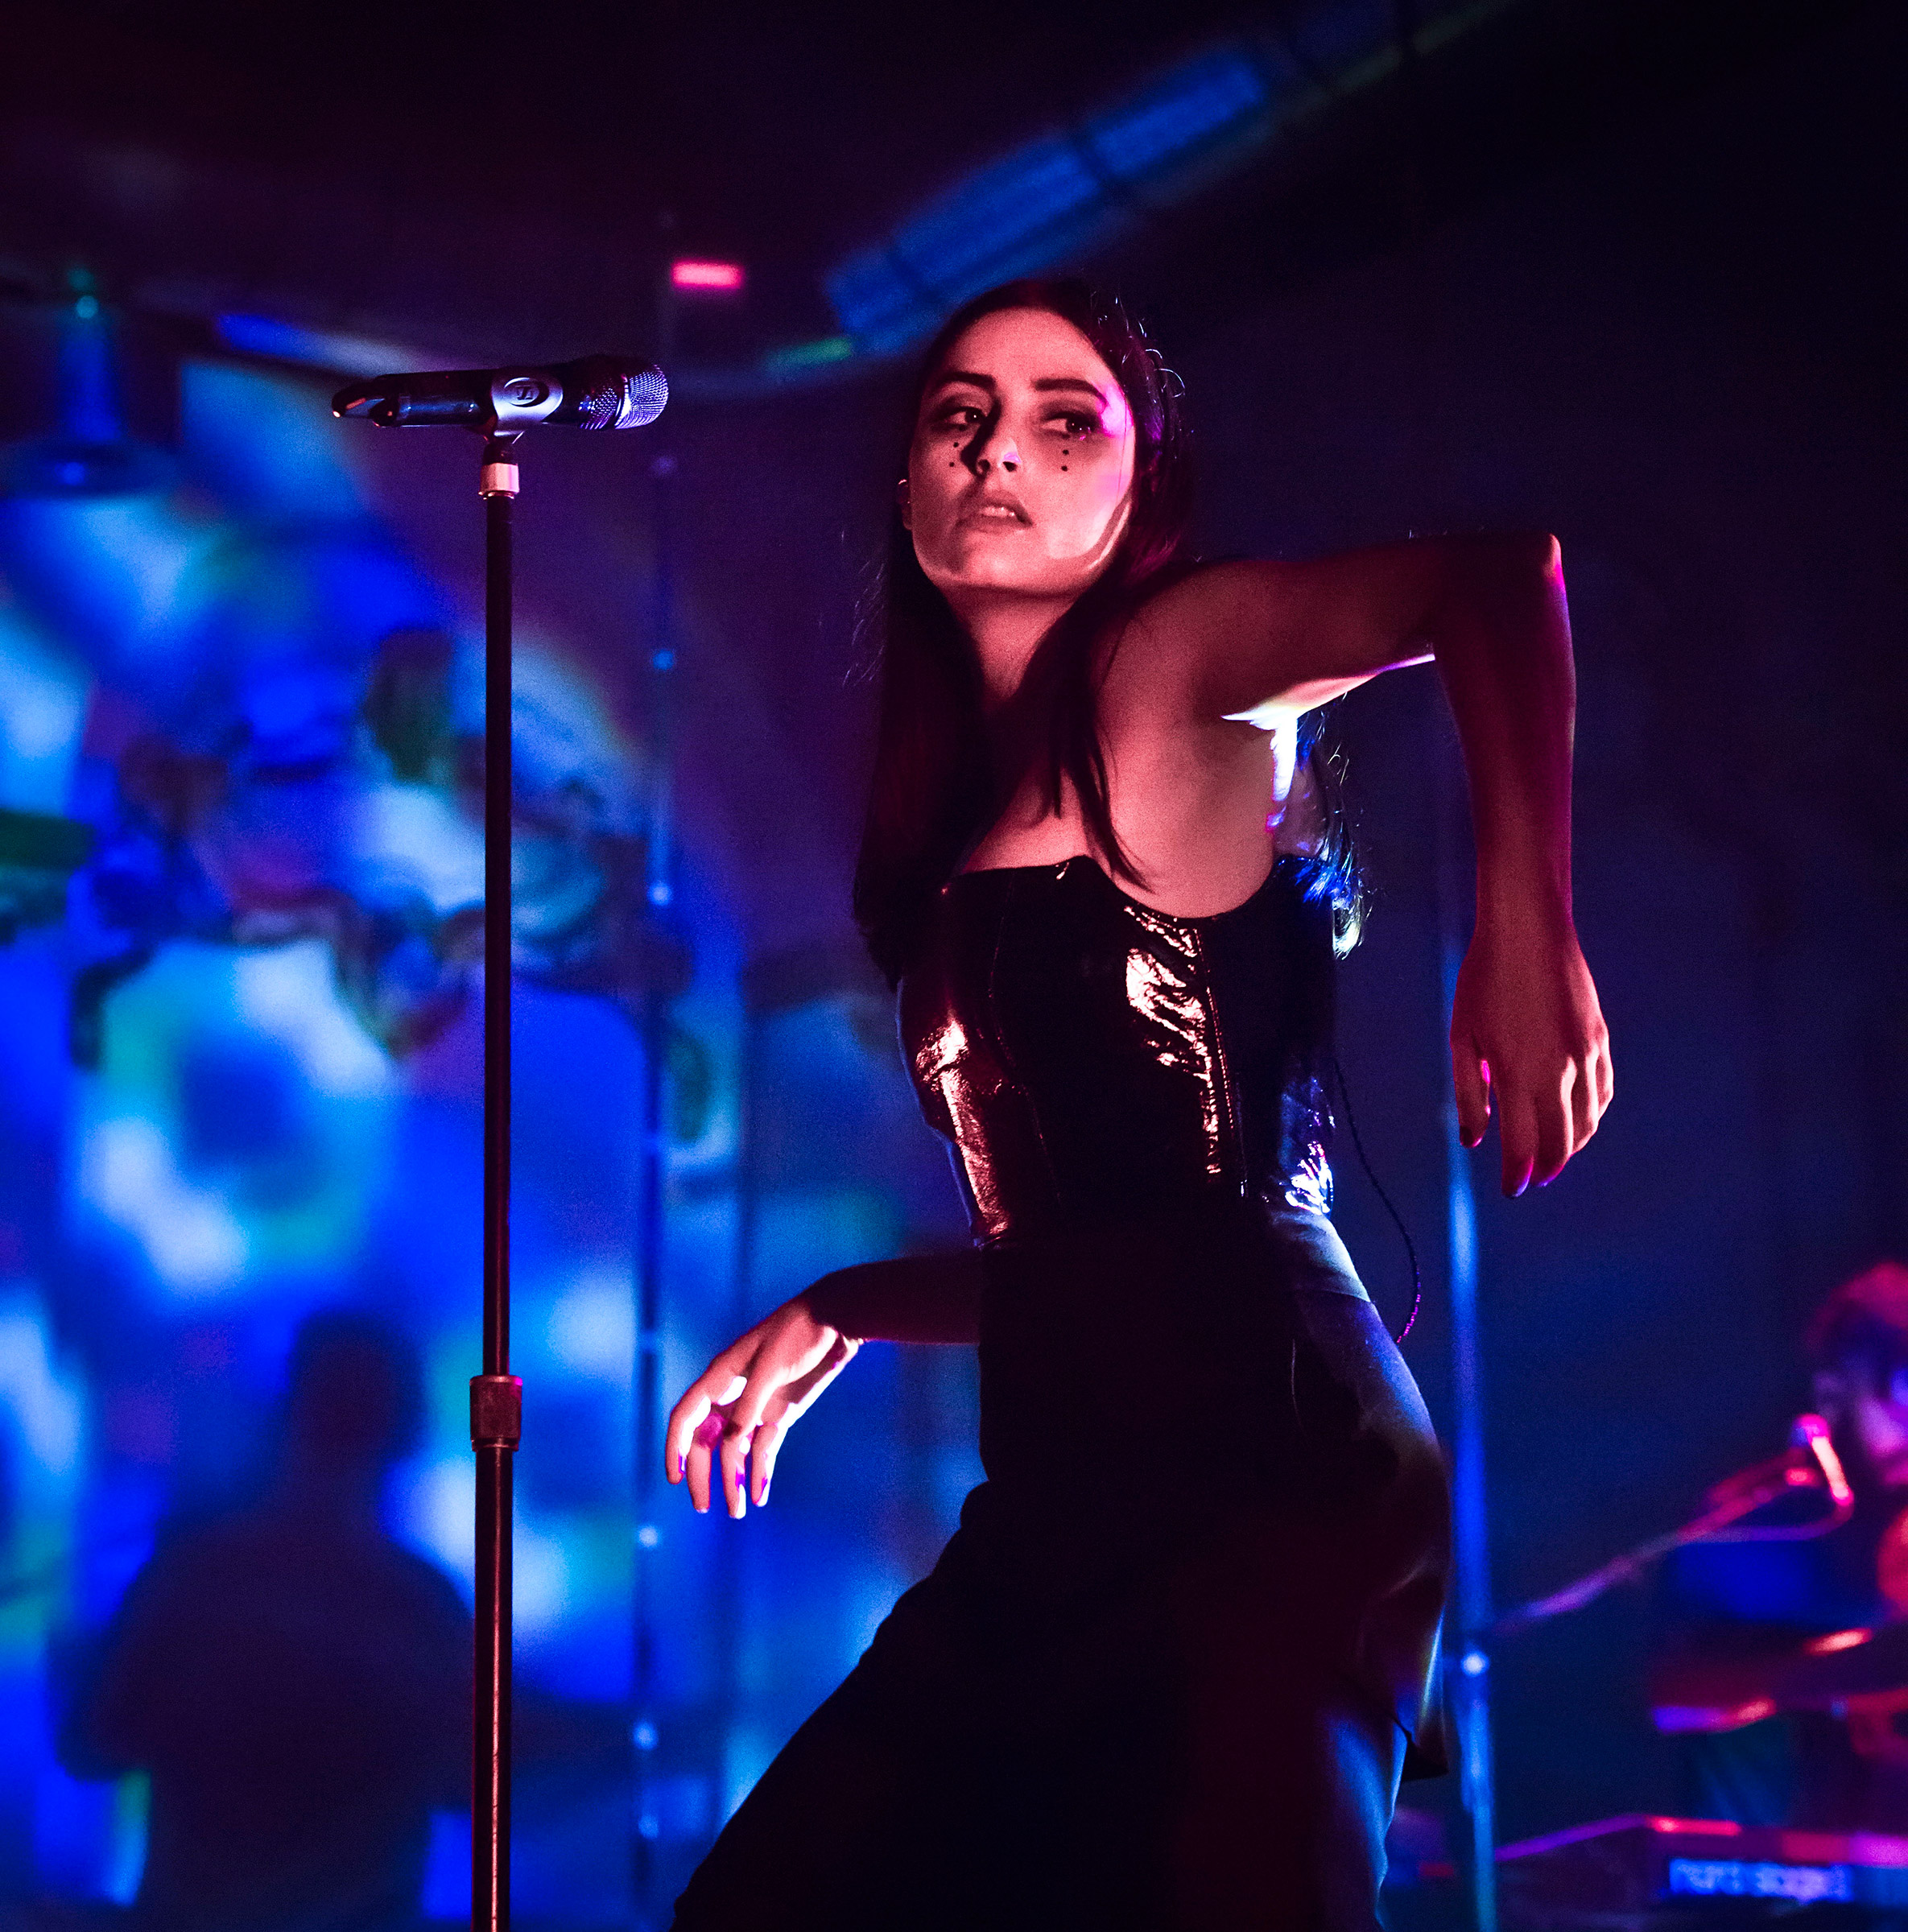 Singer Jillian Banks performs live on stage during a concert at the Huxleys on Oct. 28, 2017. (Frank Hoensch—Redferns/Getty Images)